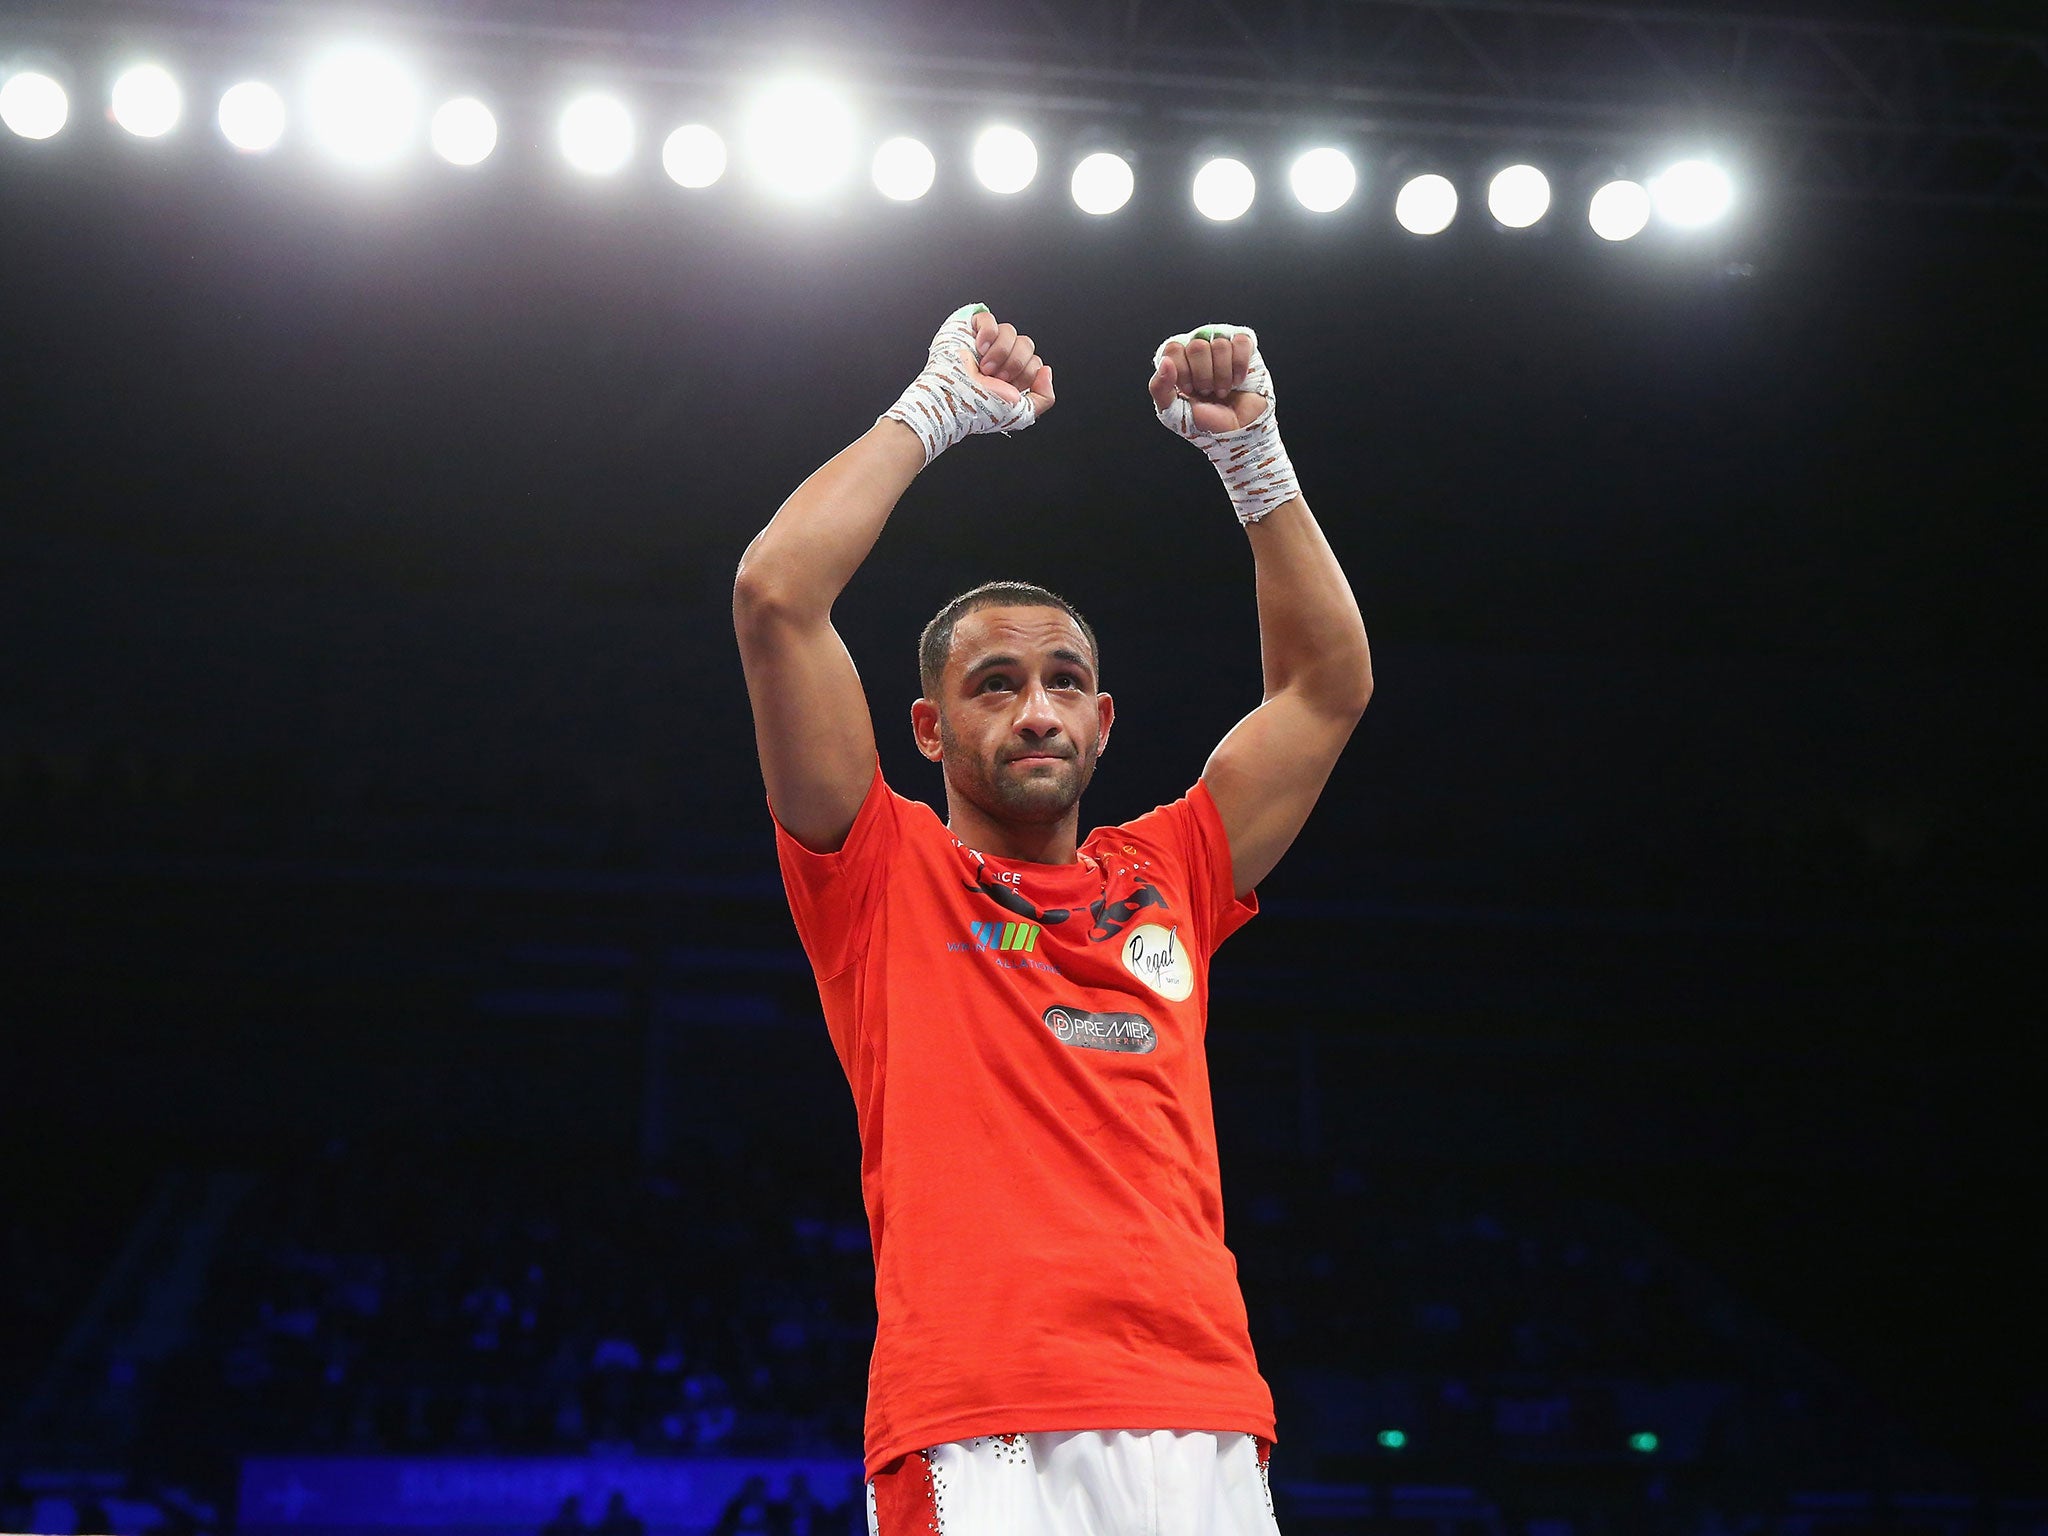 Galahad served a drugs ban following a claimed family dispute that led to his protein shake being spiked (Getty )